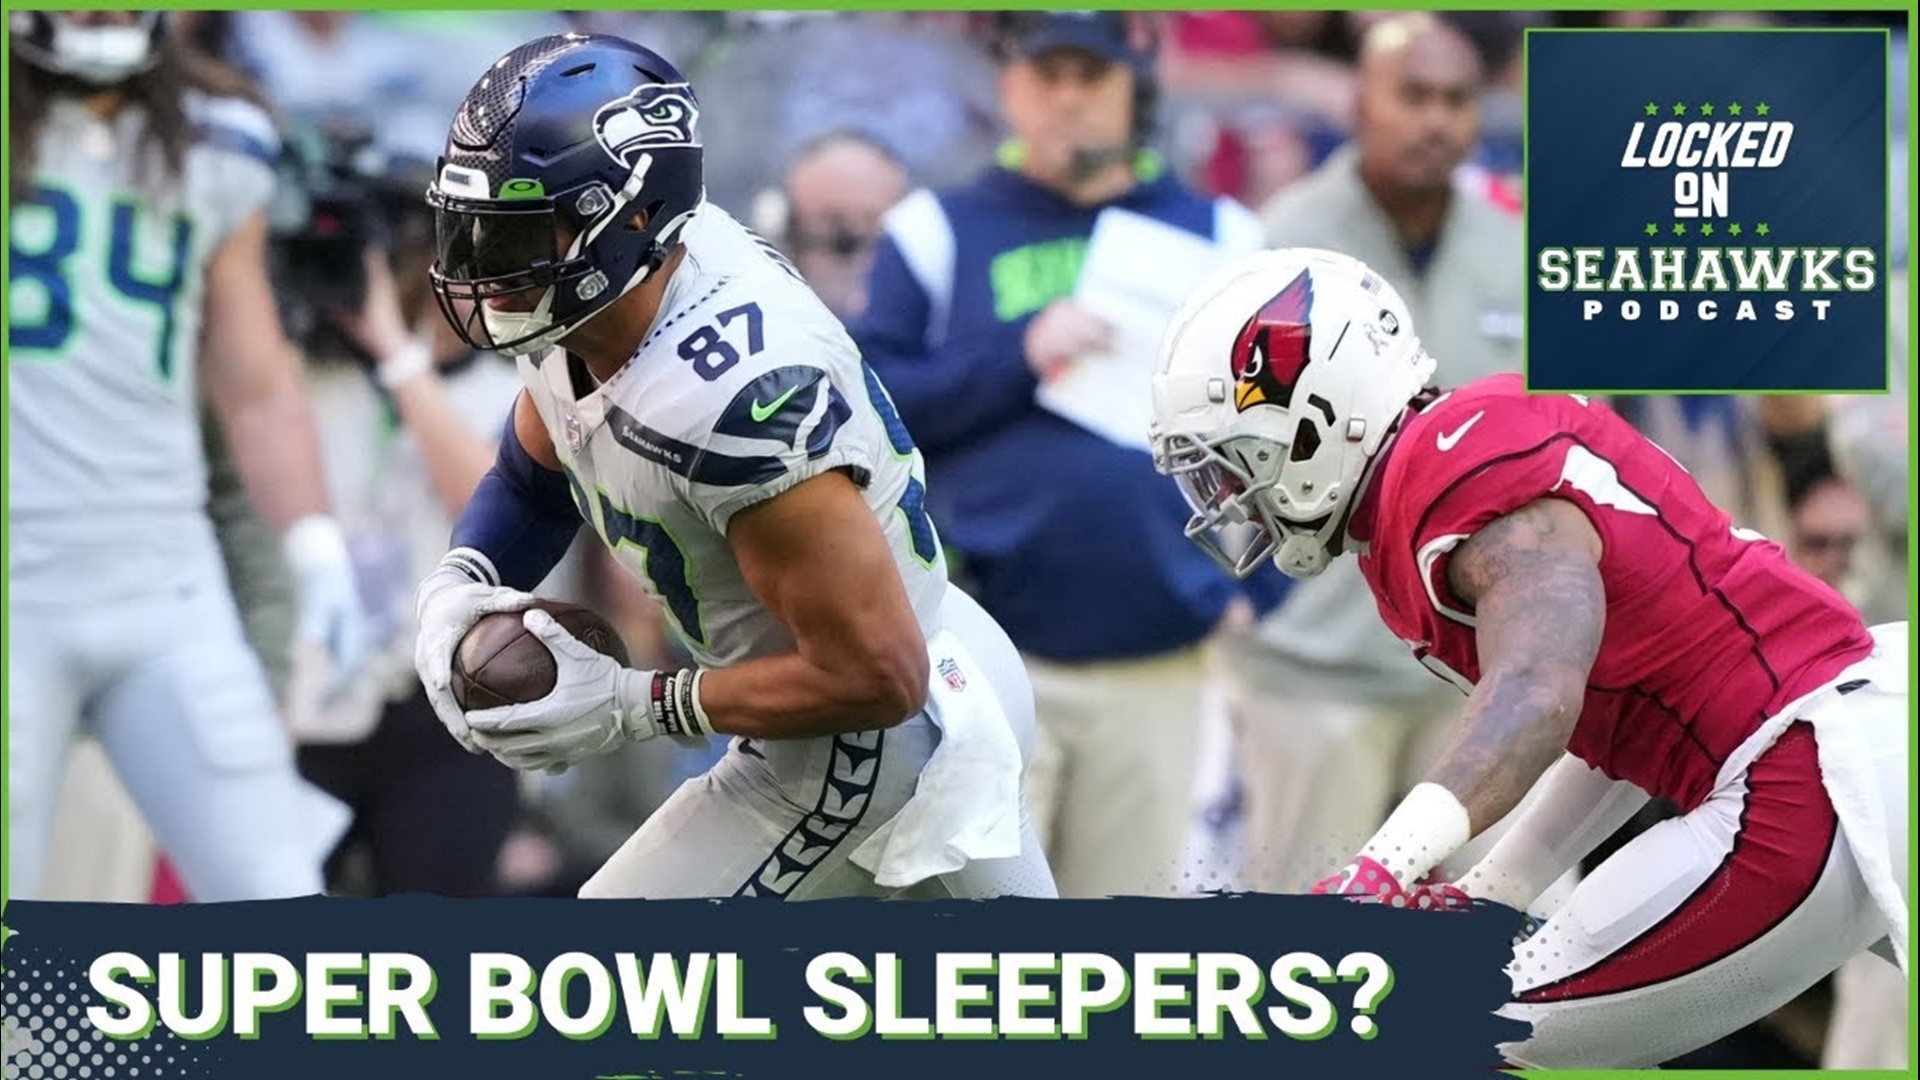 Hosts Corbin Smith and Rob Rang discuss whether or not Seattle has played its way into the discussion as a dark horse Super Bowl team, and more.